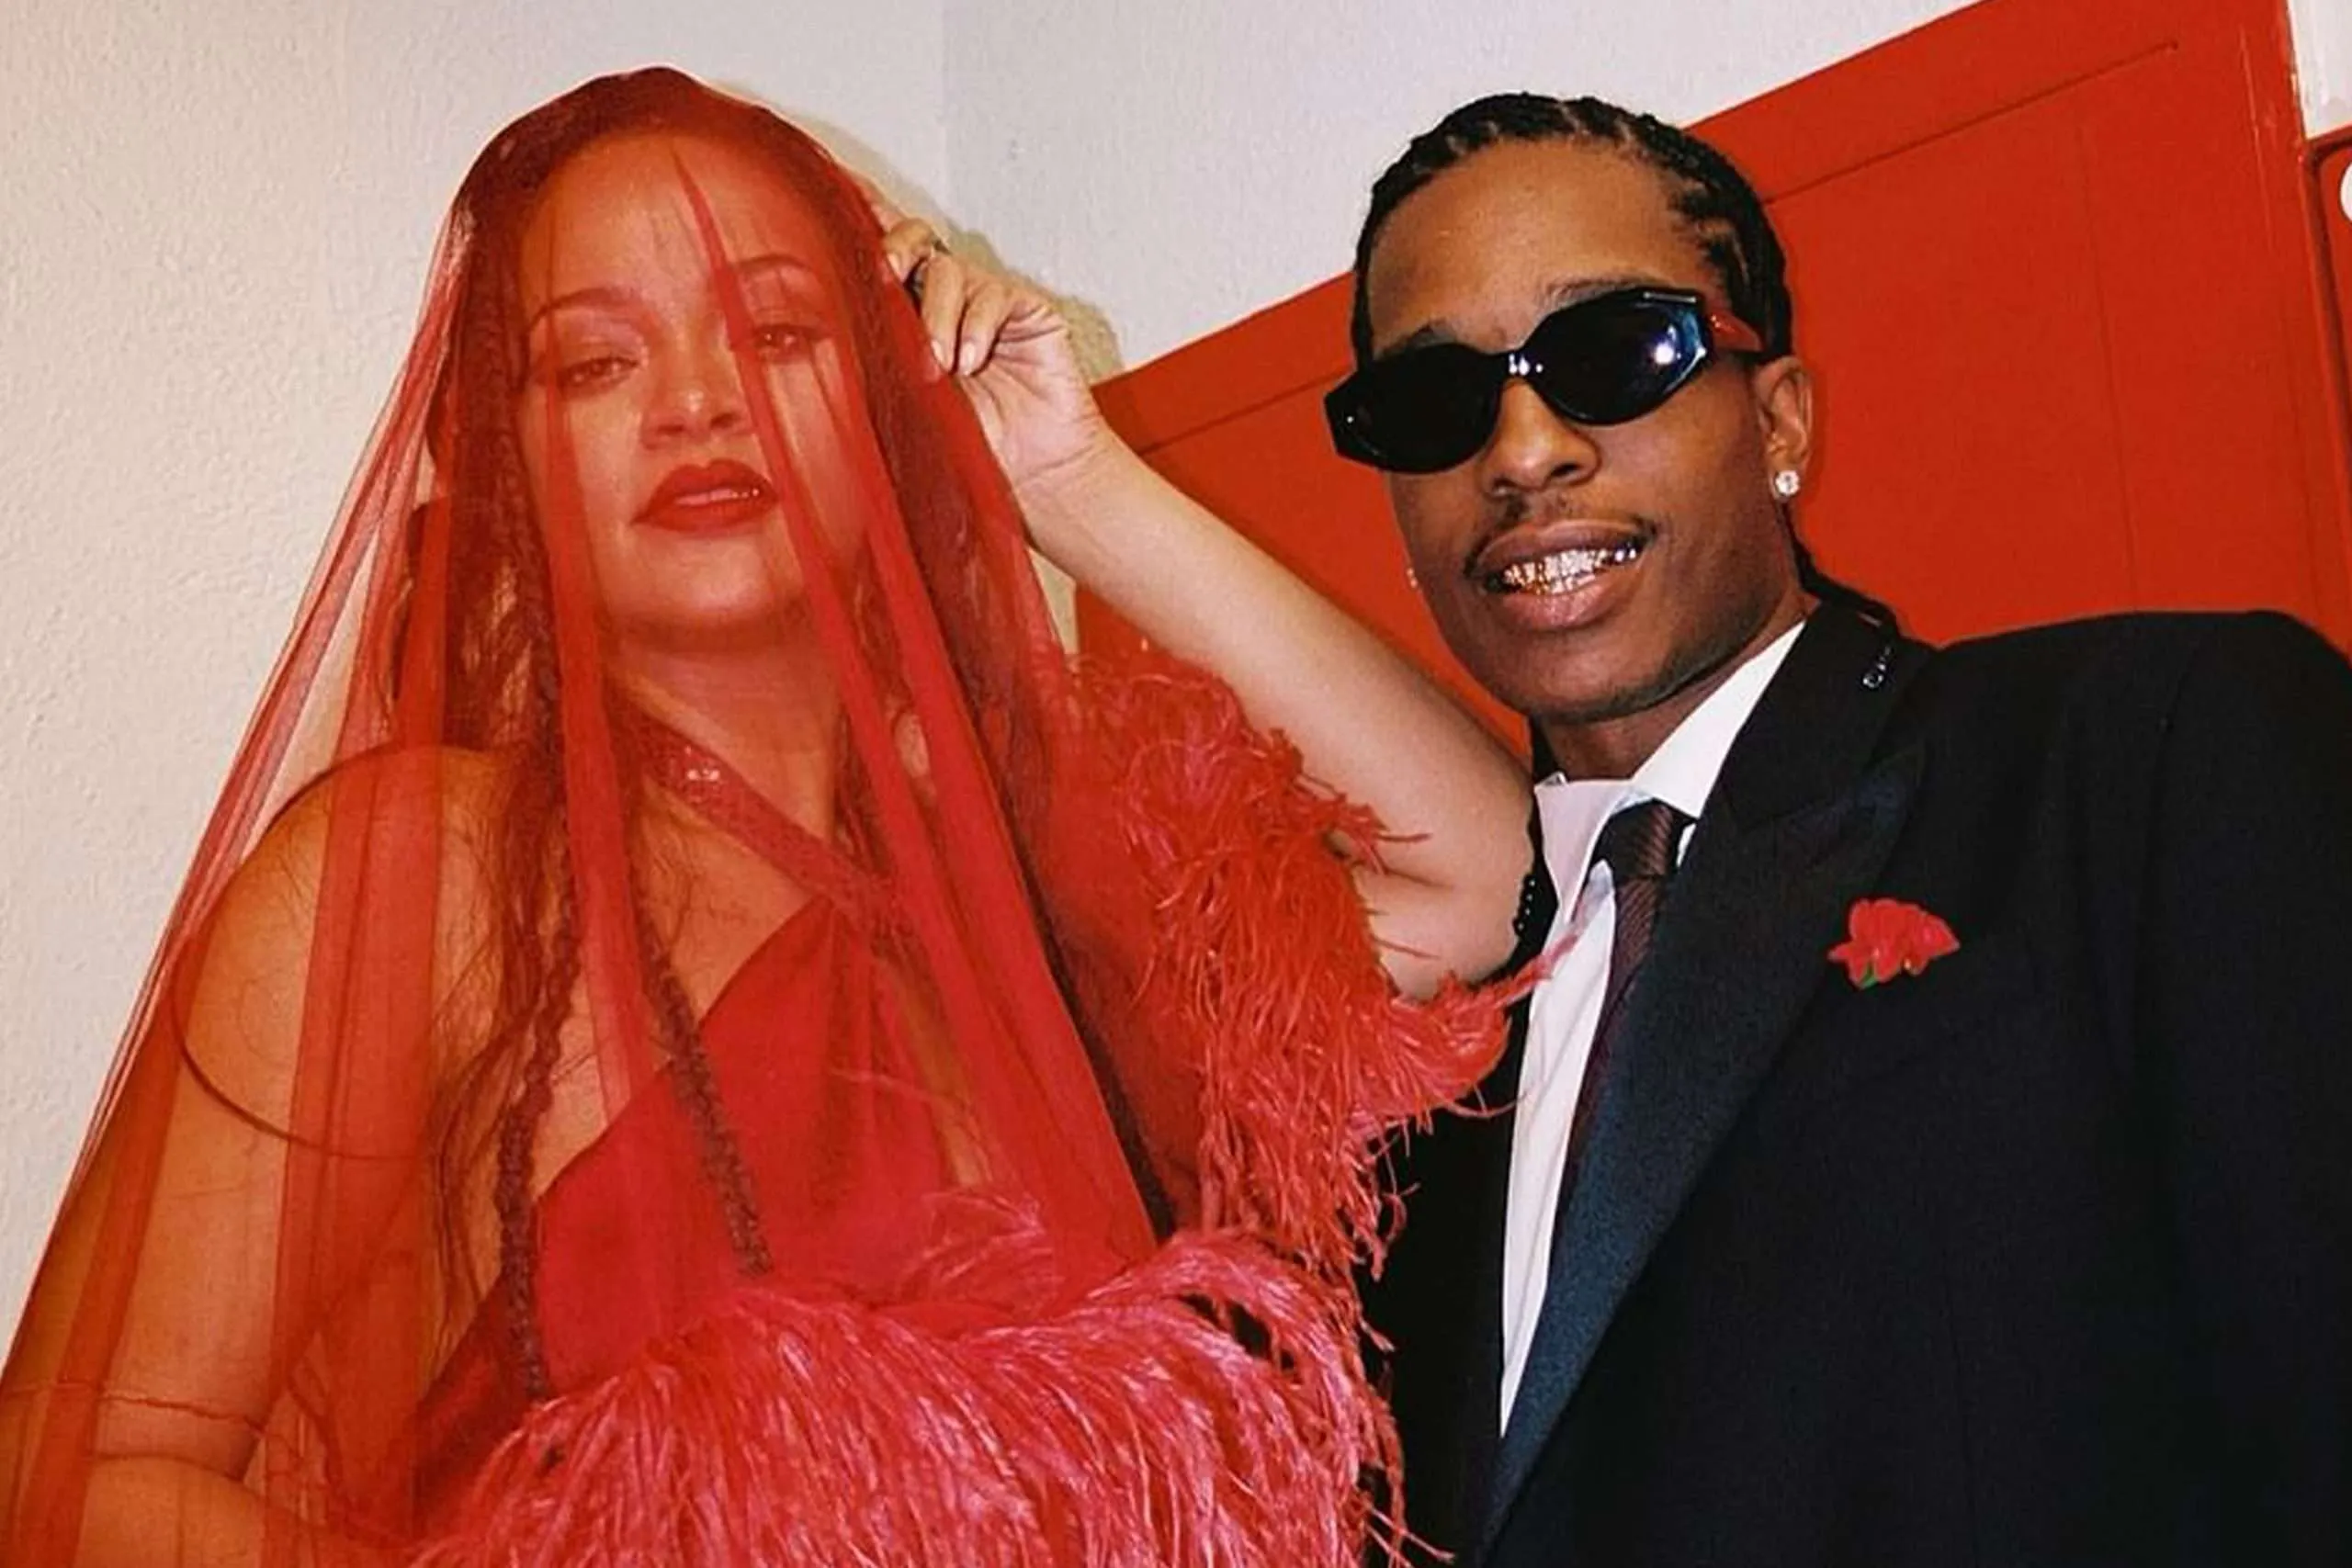 THE LOOKS WE'D SAY 'I DO' TO FROM A$AP ROCKY'S D.M.B VIDEO - Culted